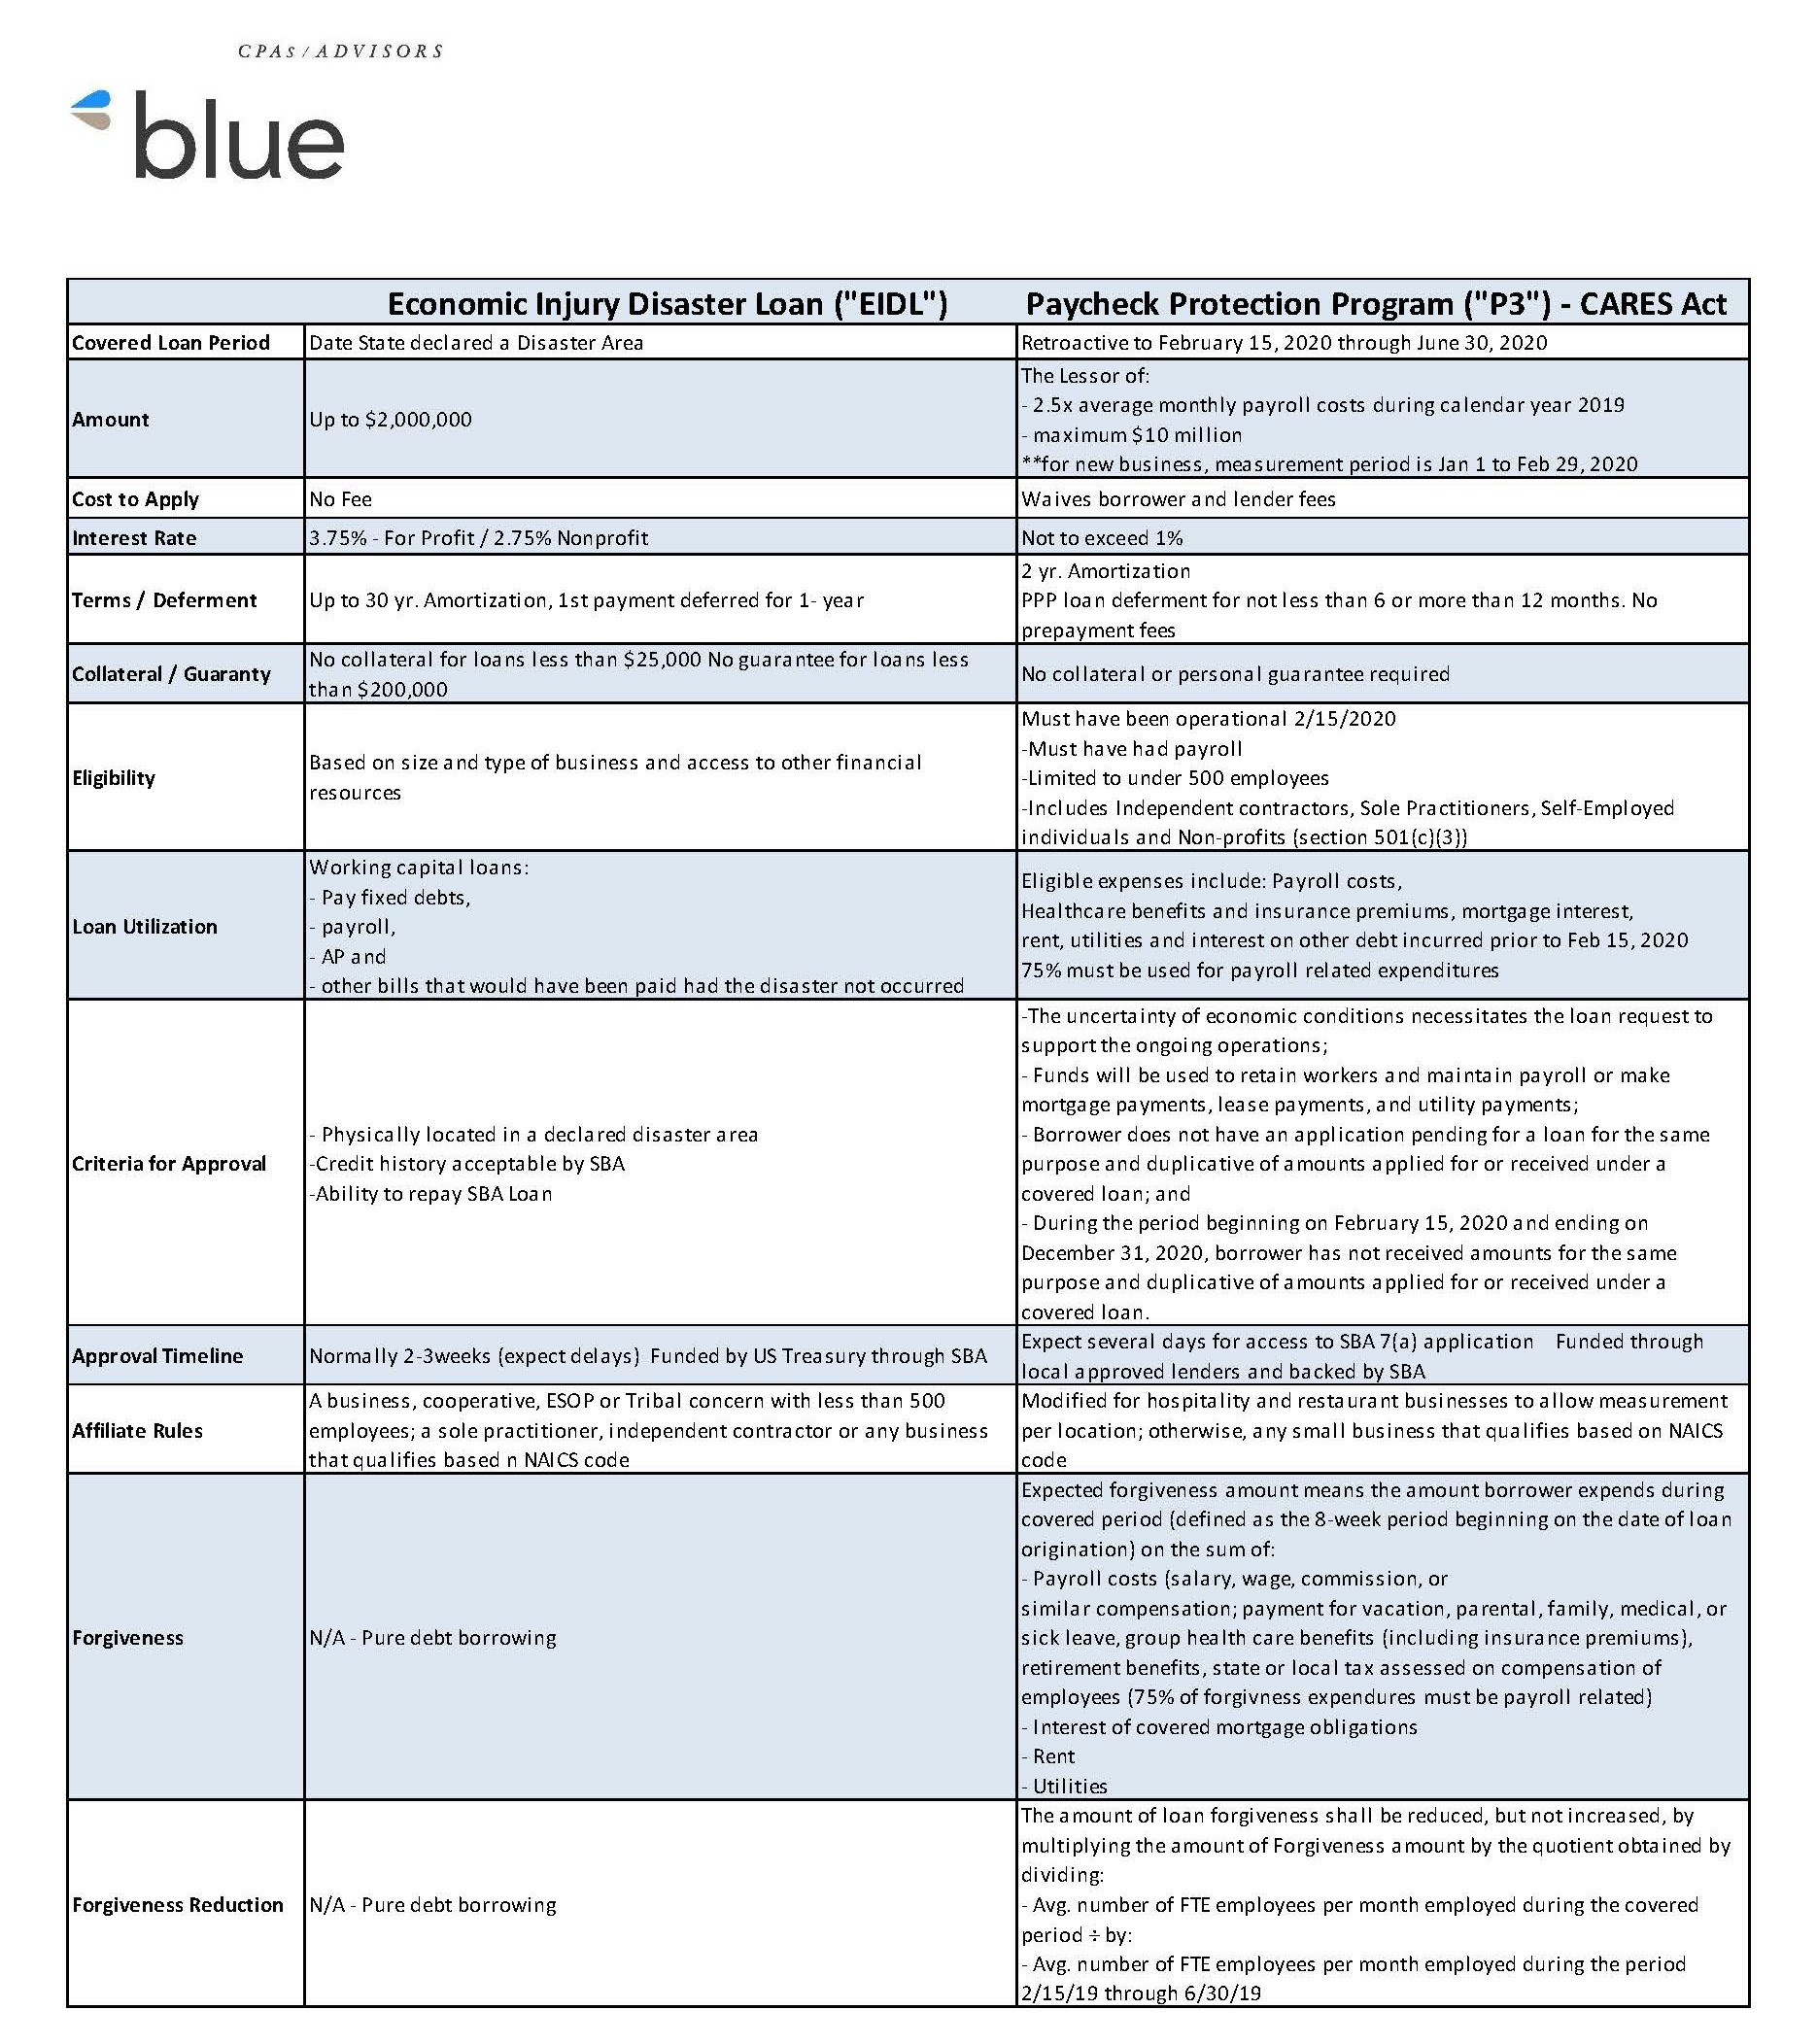 Blue & Co. 2020 Comparison of EIDL and PPP Program